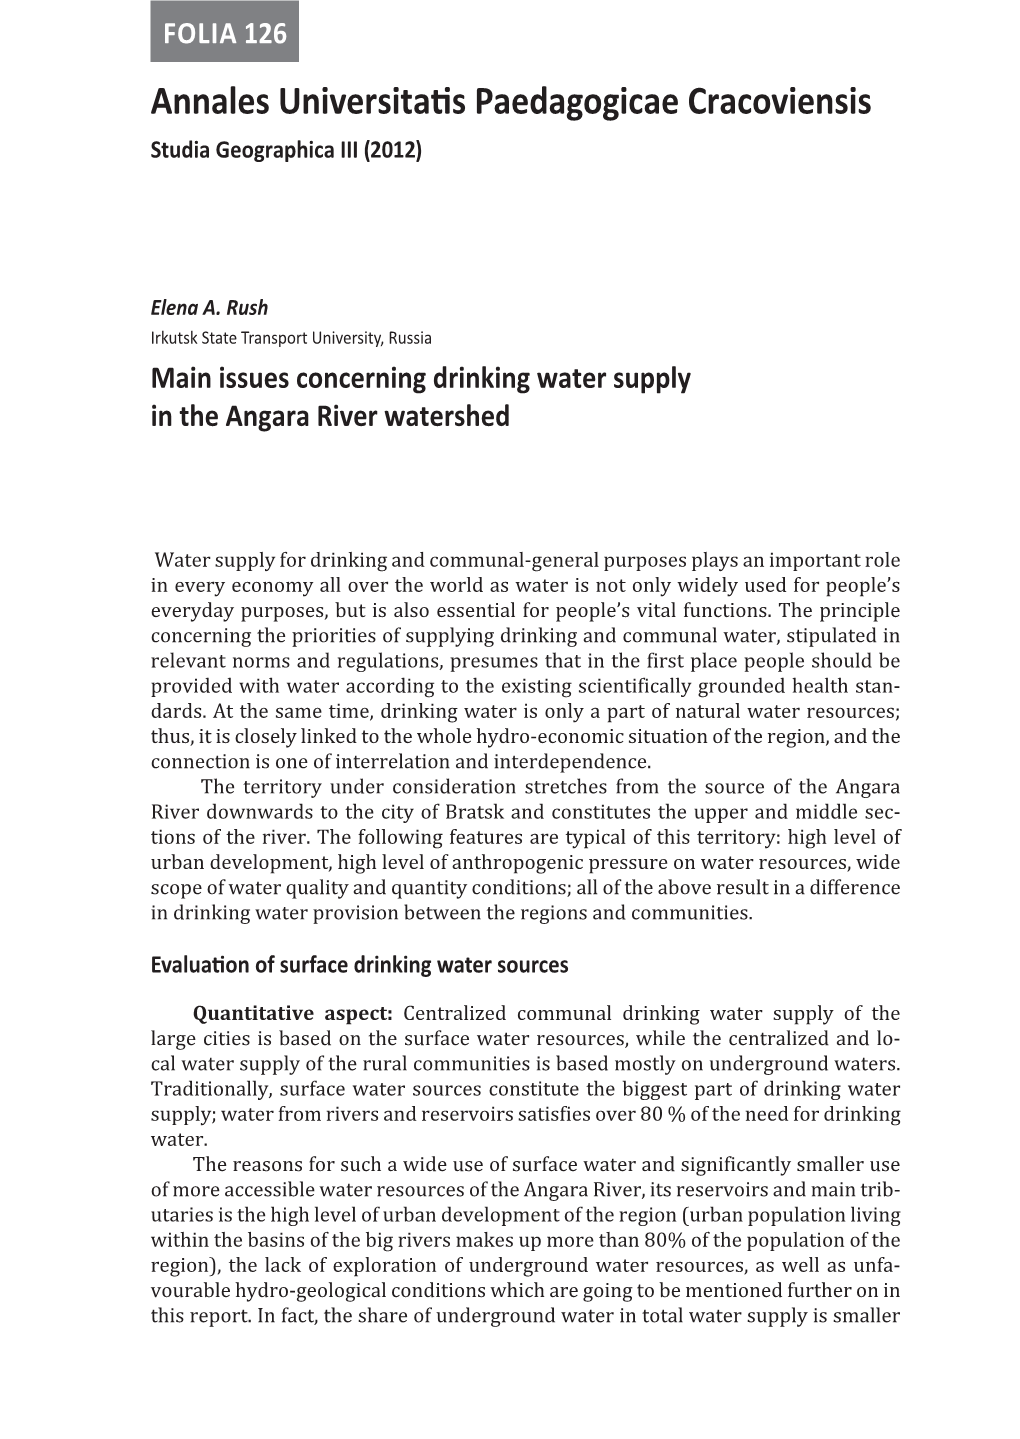 Issues Concerning Drinking Water Supply in the Angara River Watershed